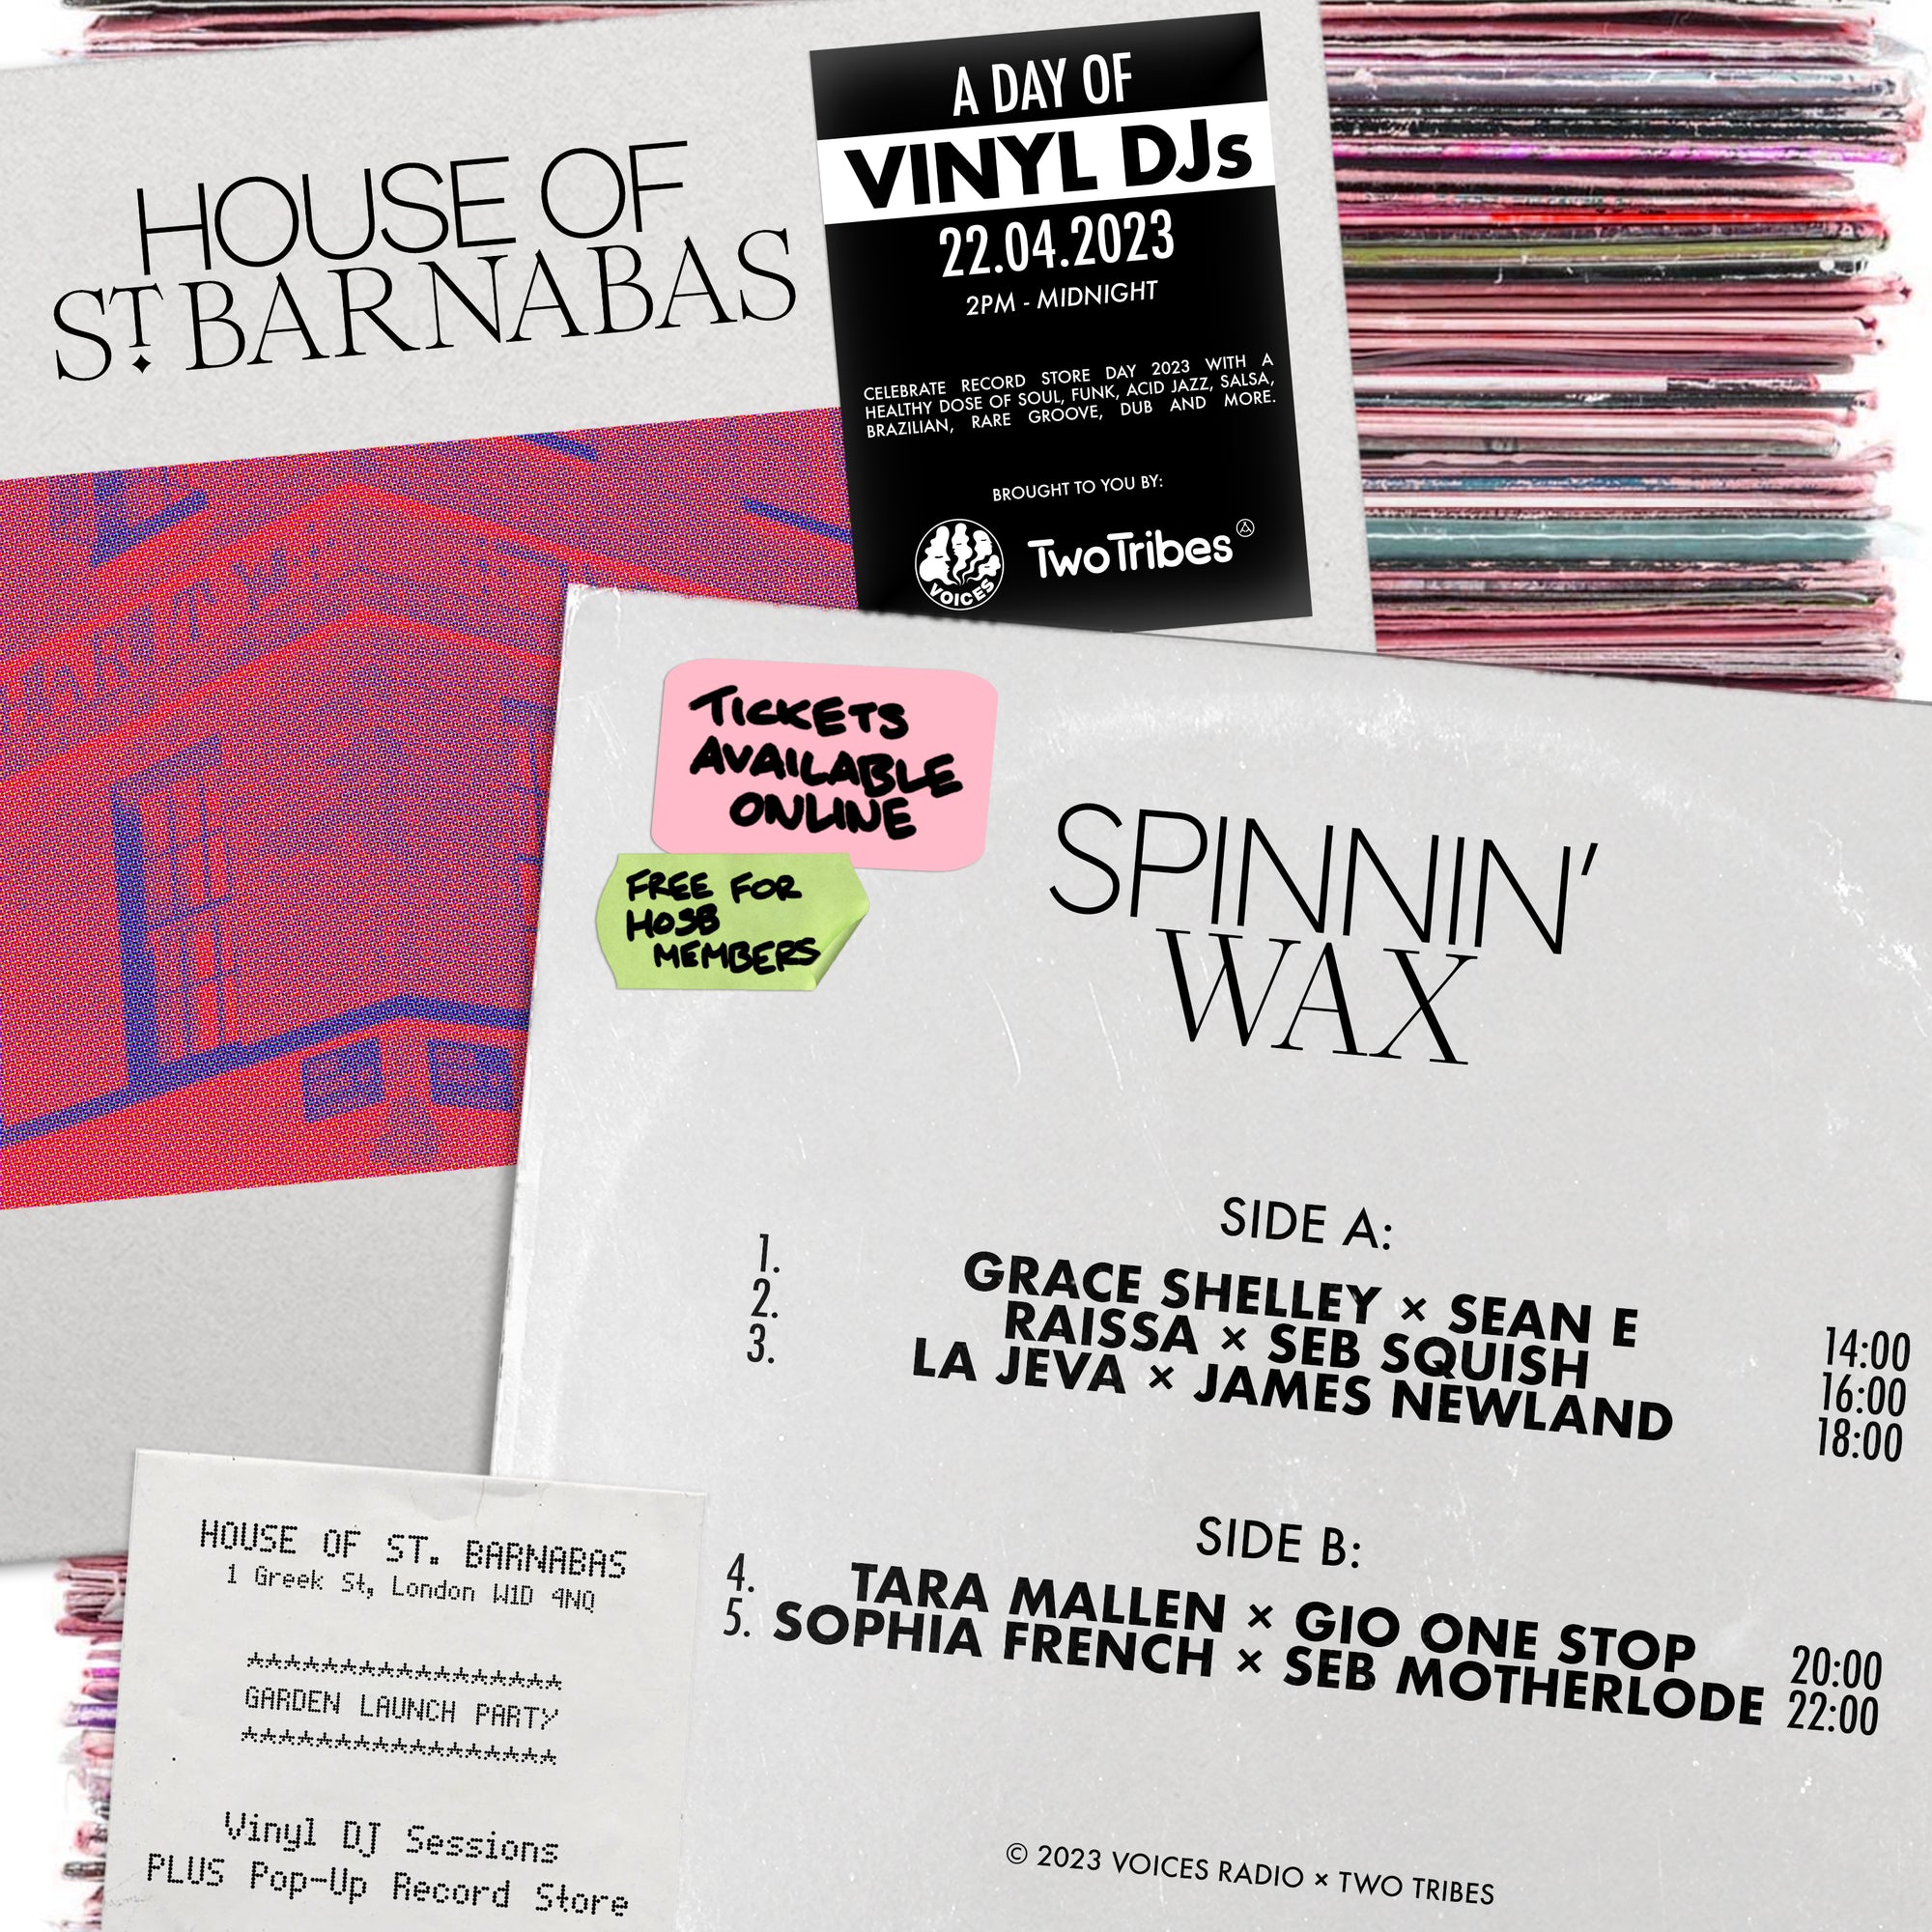 SPINNIN' WAX > House of St Barnabas Official Garden Launch Party